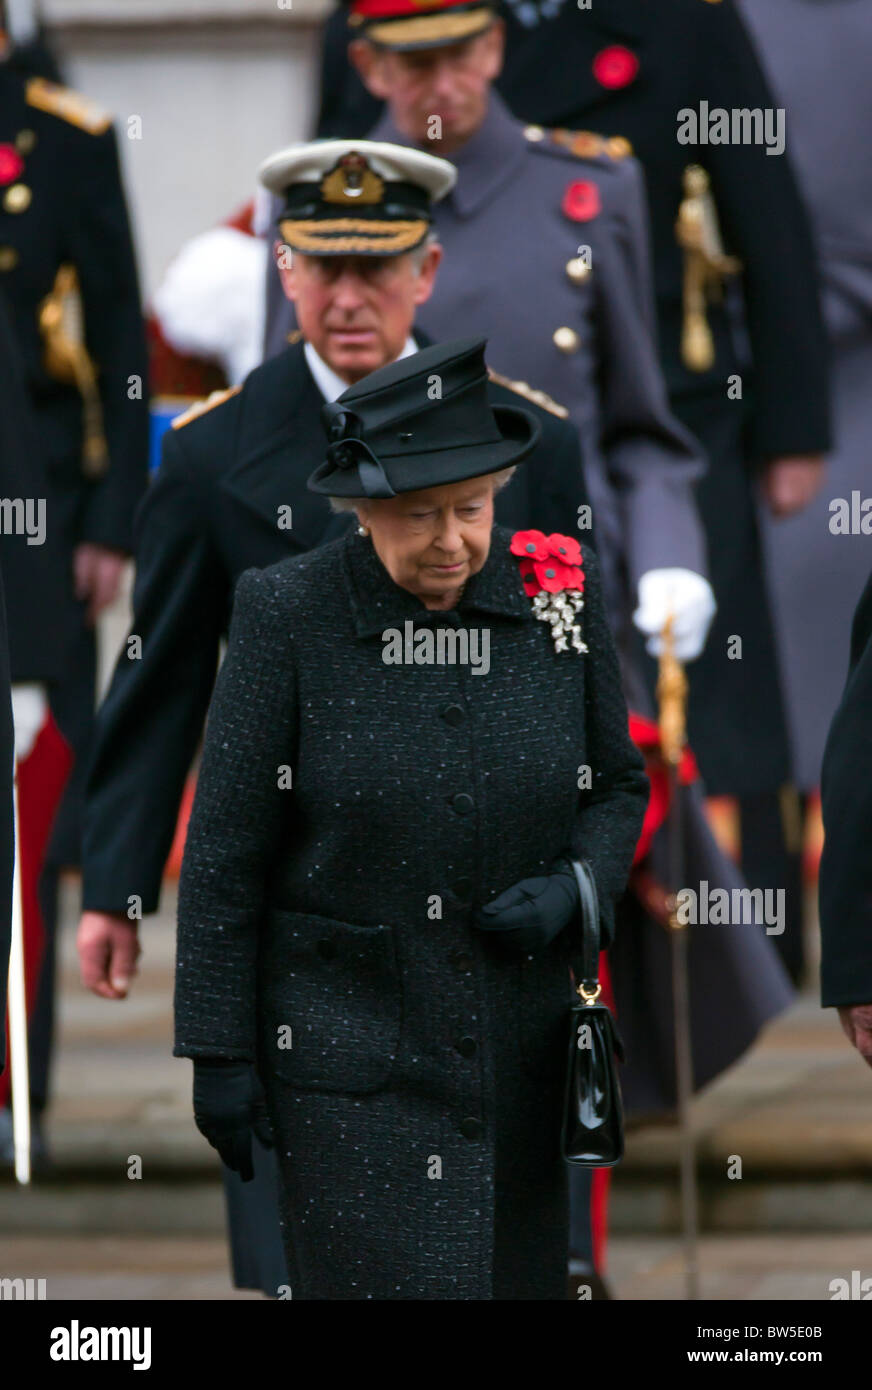 The Remembrance Sunday ceremony held at the Cenotaph in Whitehall, London, and attended by the British Royal family 2010 Stock Photo